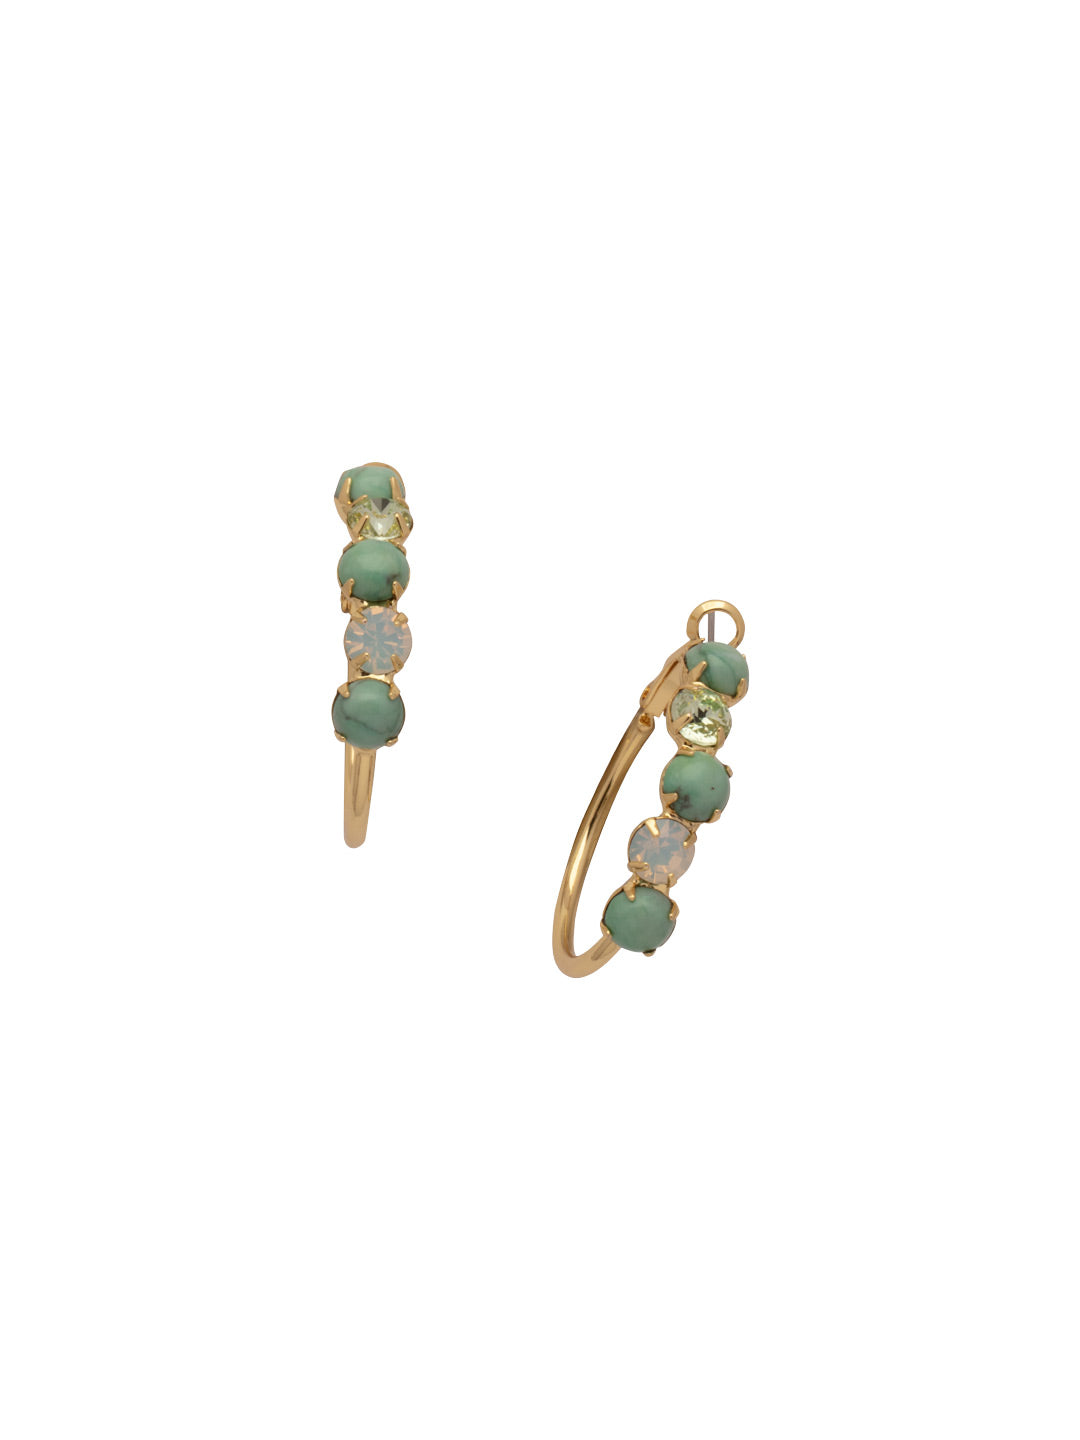 Xena Hoop Earrings - EFF112BGSGR - <p>The Xena Hoop Earrings feature small round cut crystals and semi-precious stones on a classic metal hoop. From Sorrelli's Sage Green collection in our Bright Gold-tone finish.</p>